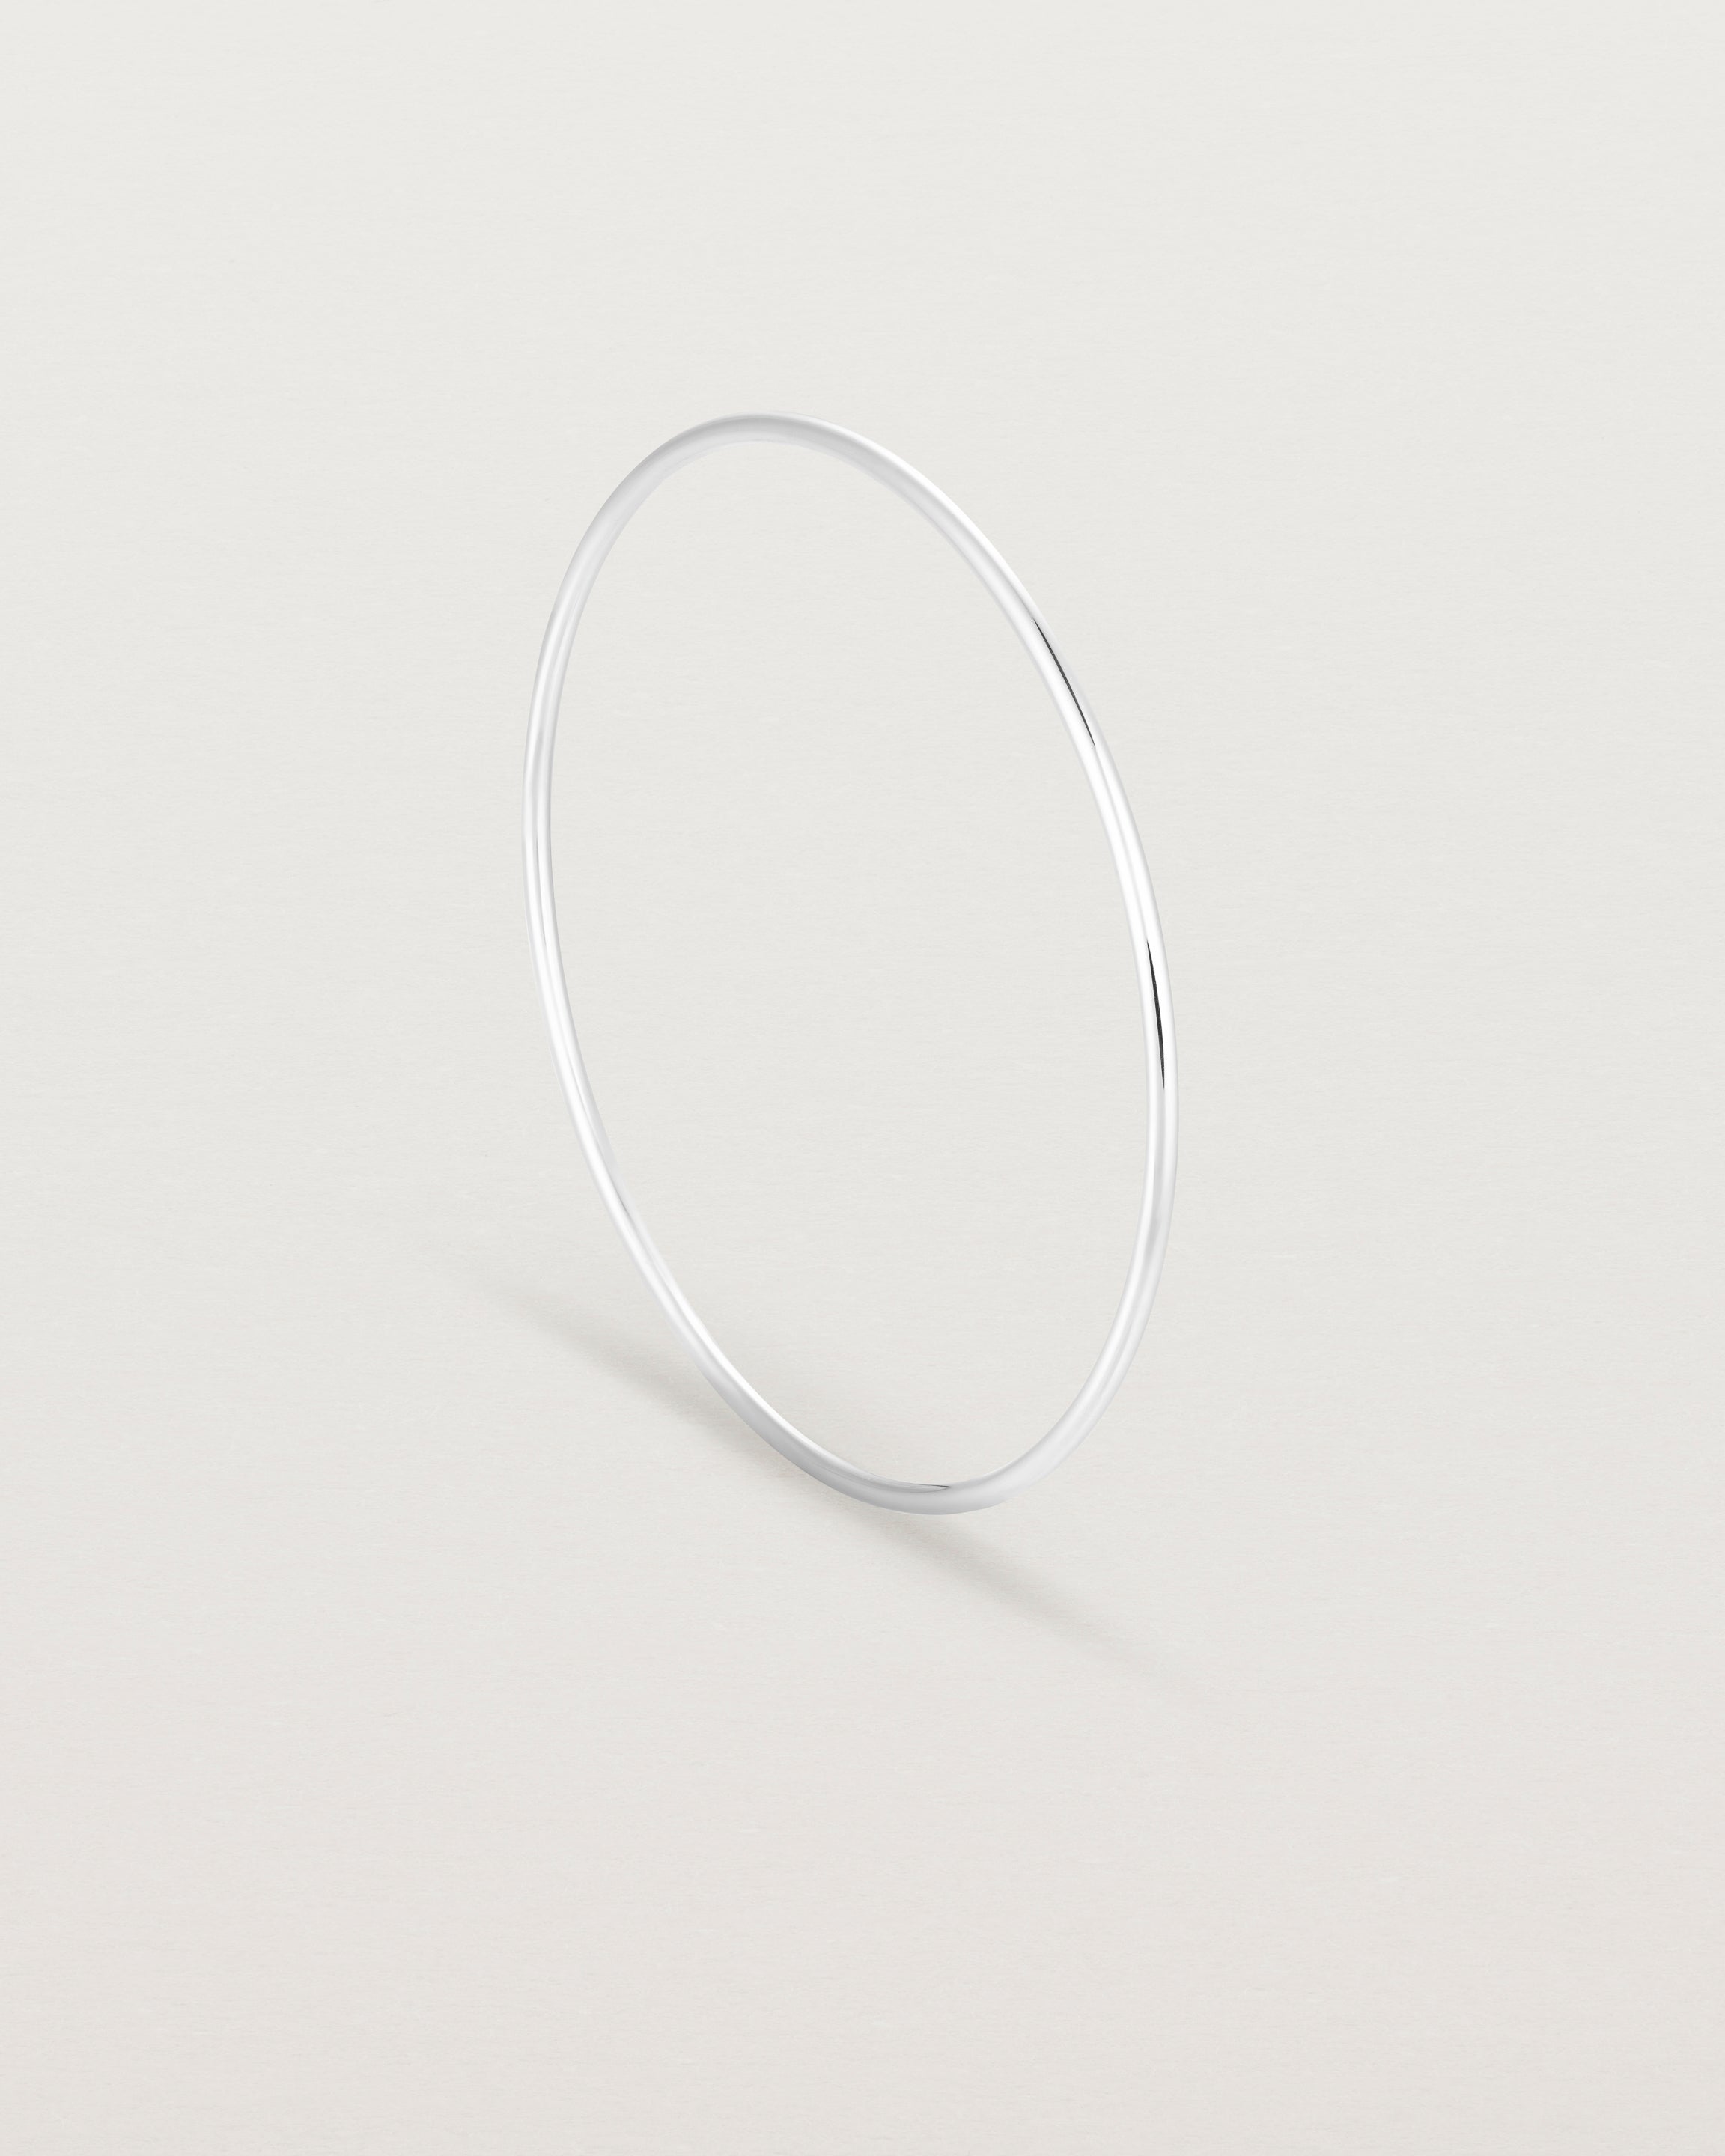 Standing view of the Oval Bangle in Sterling Silver.